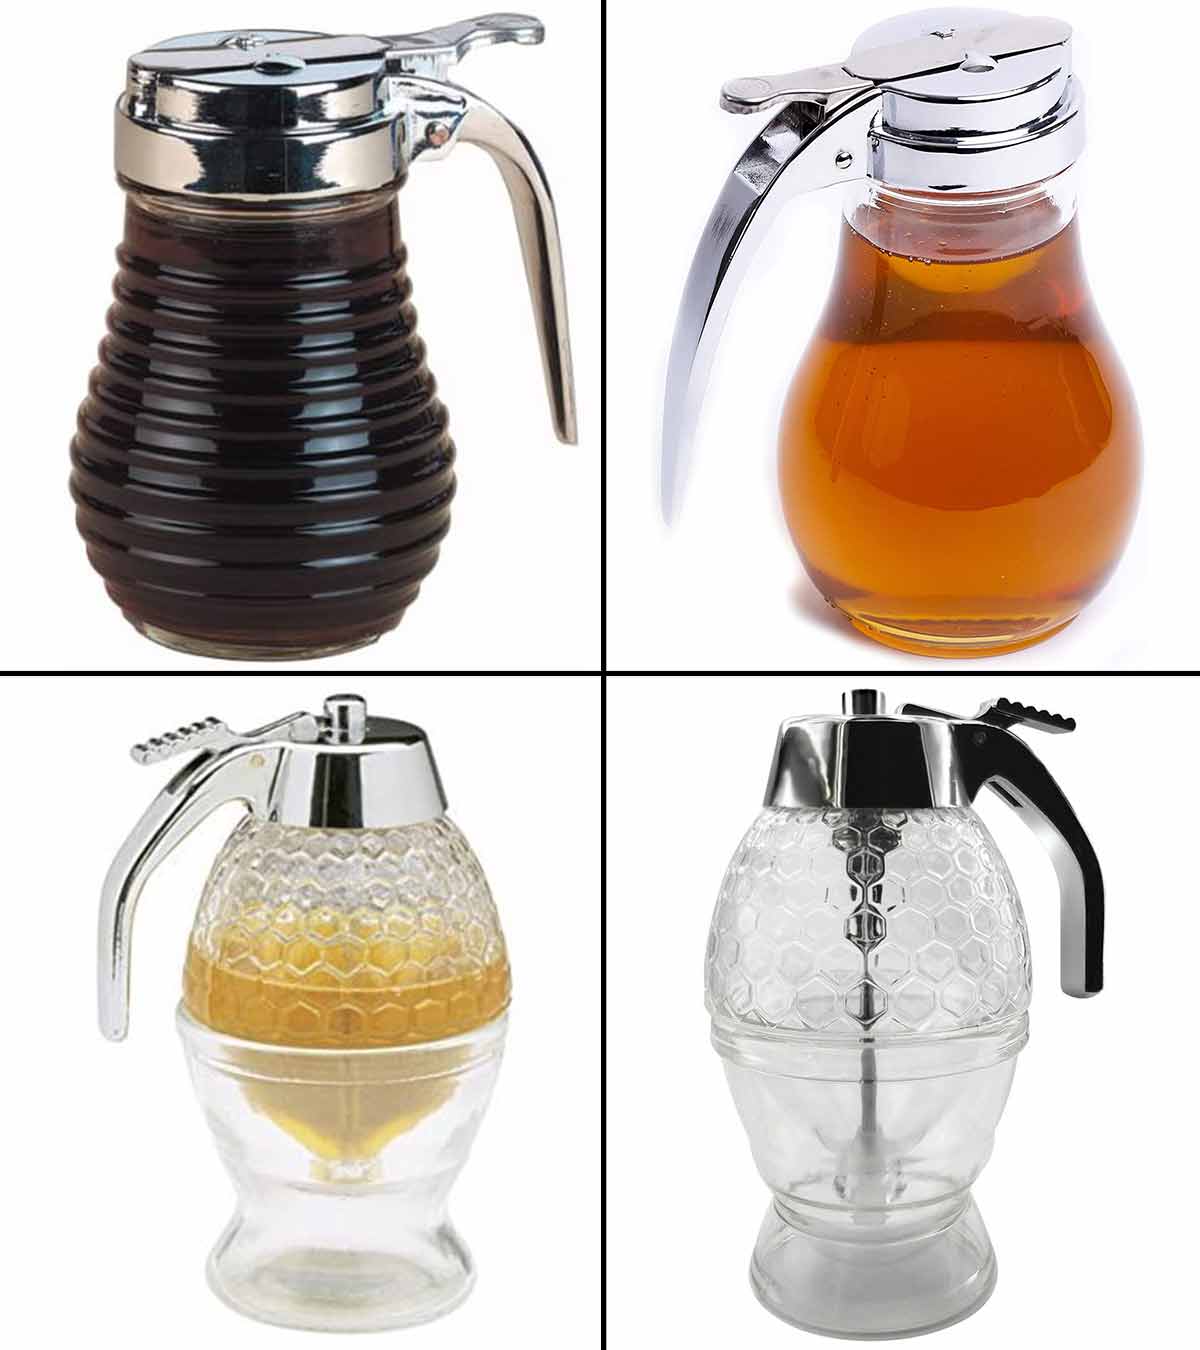 Syrup Dispenser,Kids Friendly Honey Jar Refill,Honey Dispenser with Counter Top Storage Stand and Stopper,Shatter Proof & BPA Free,No Drip Moderate Flow Renewed 200ML honey jar and dipper